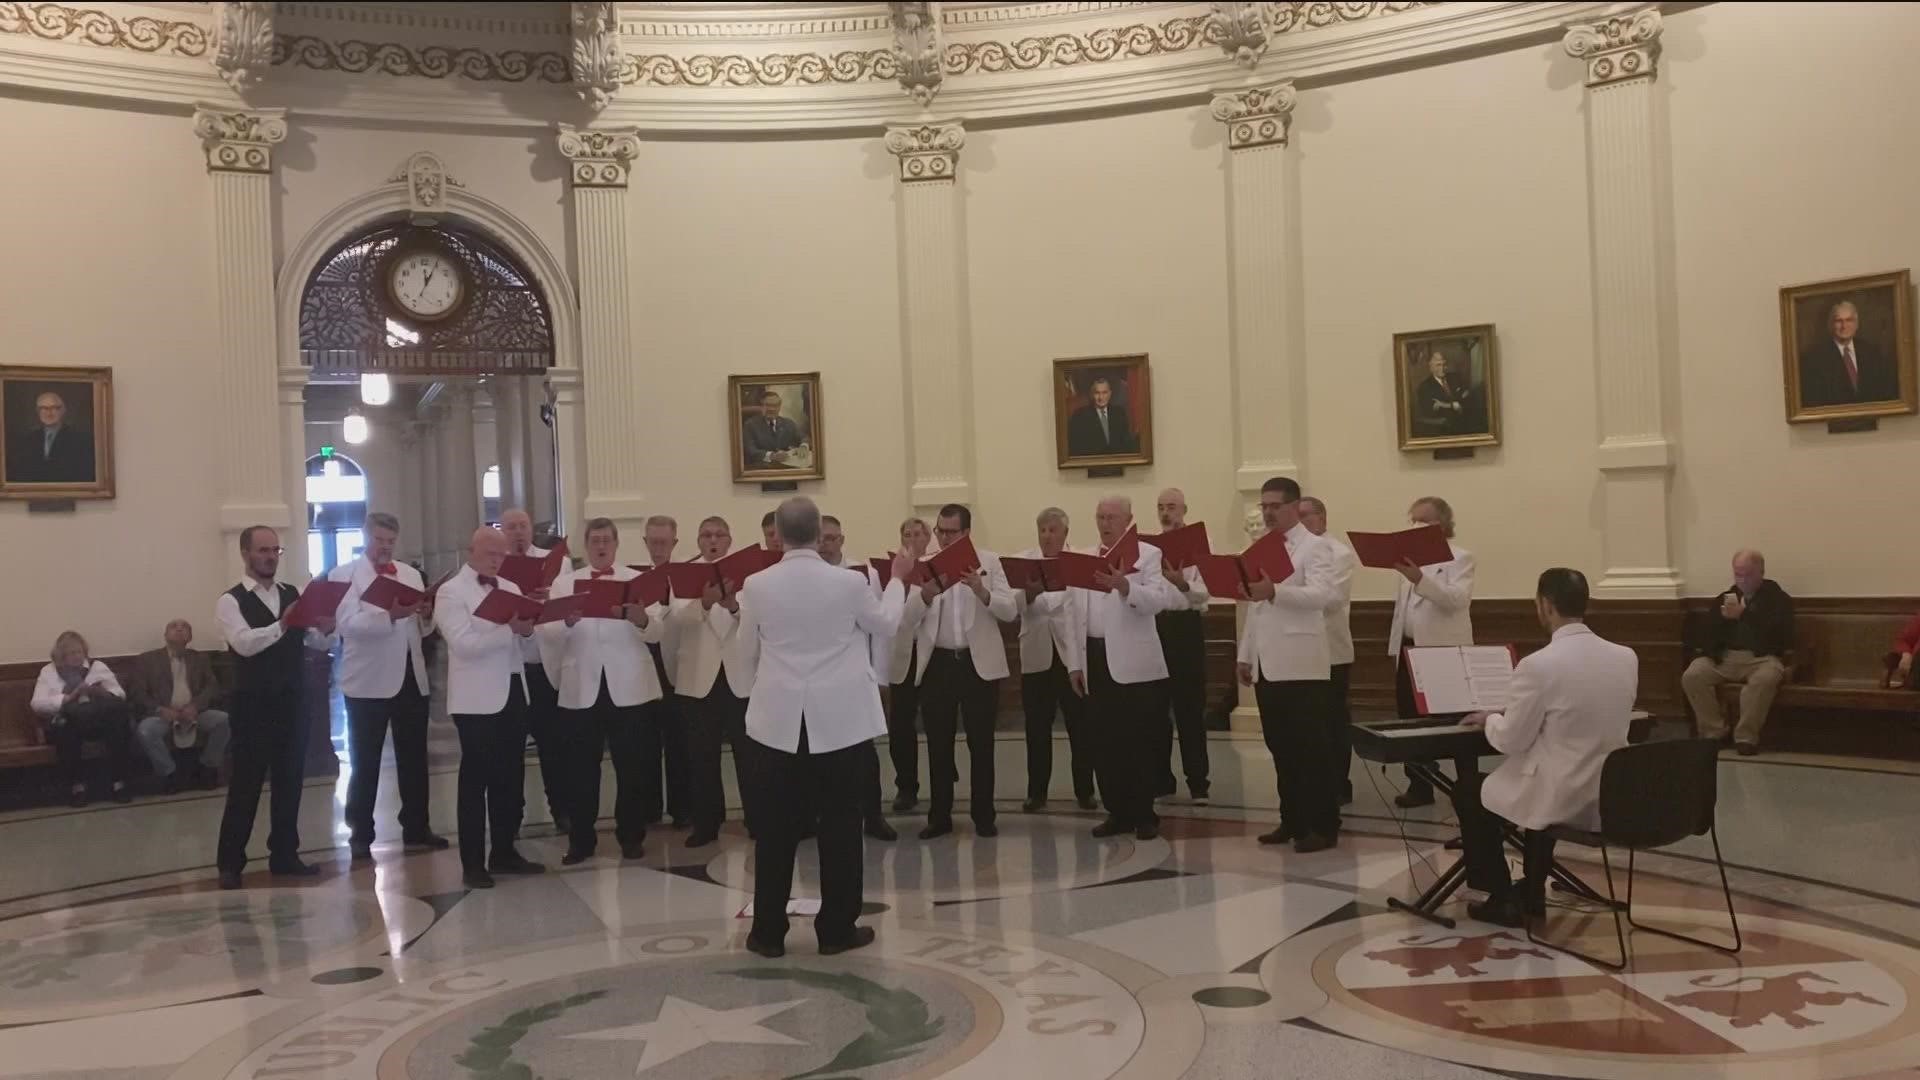 There is some holiday caroling taking place inside the Texas Capitol!